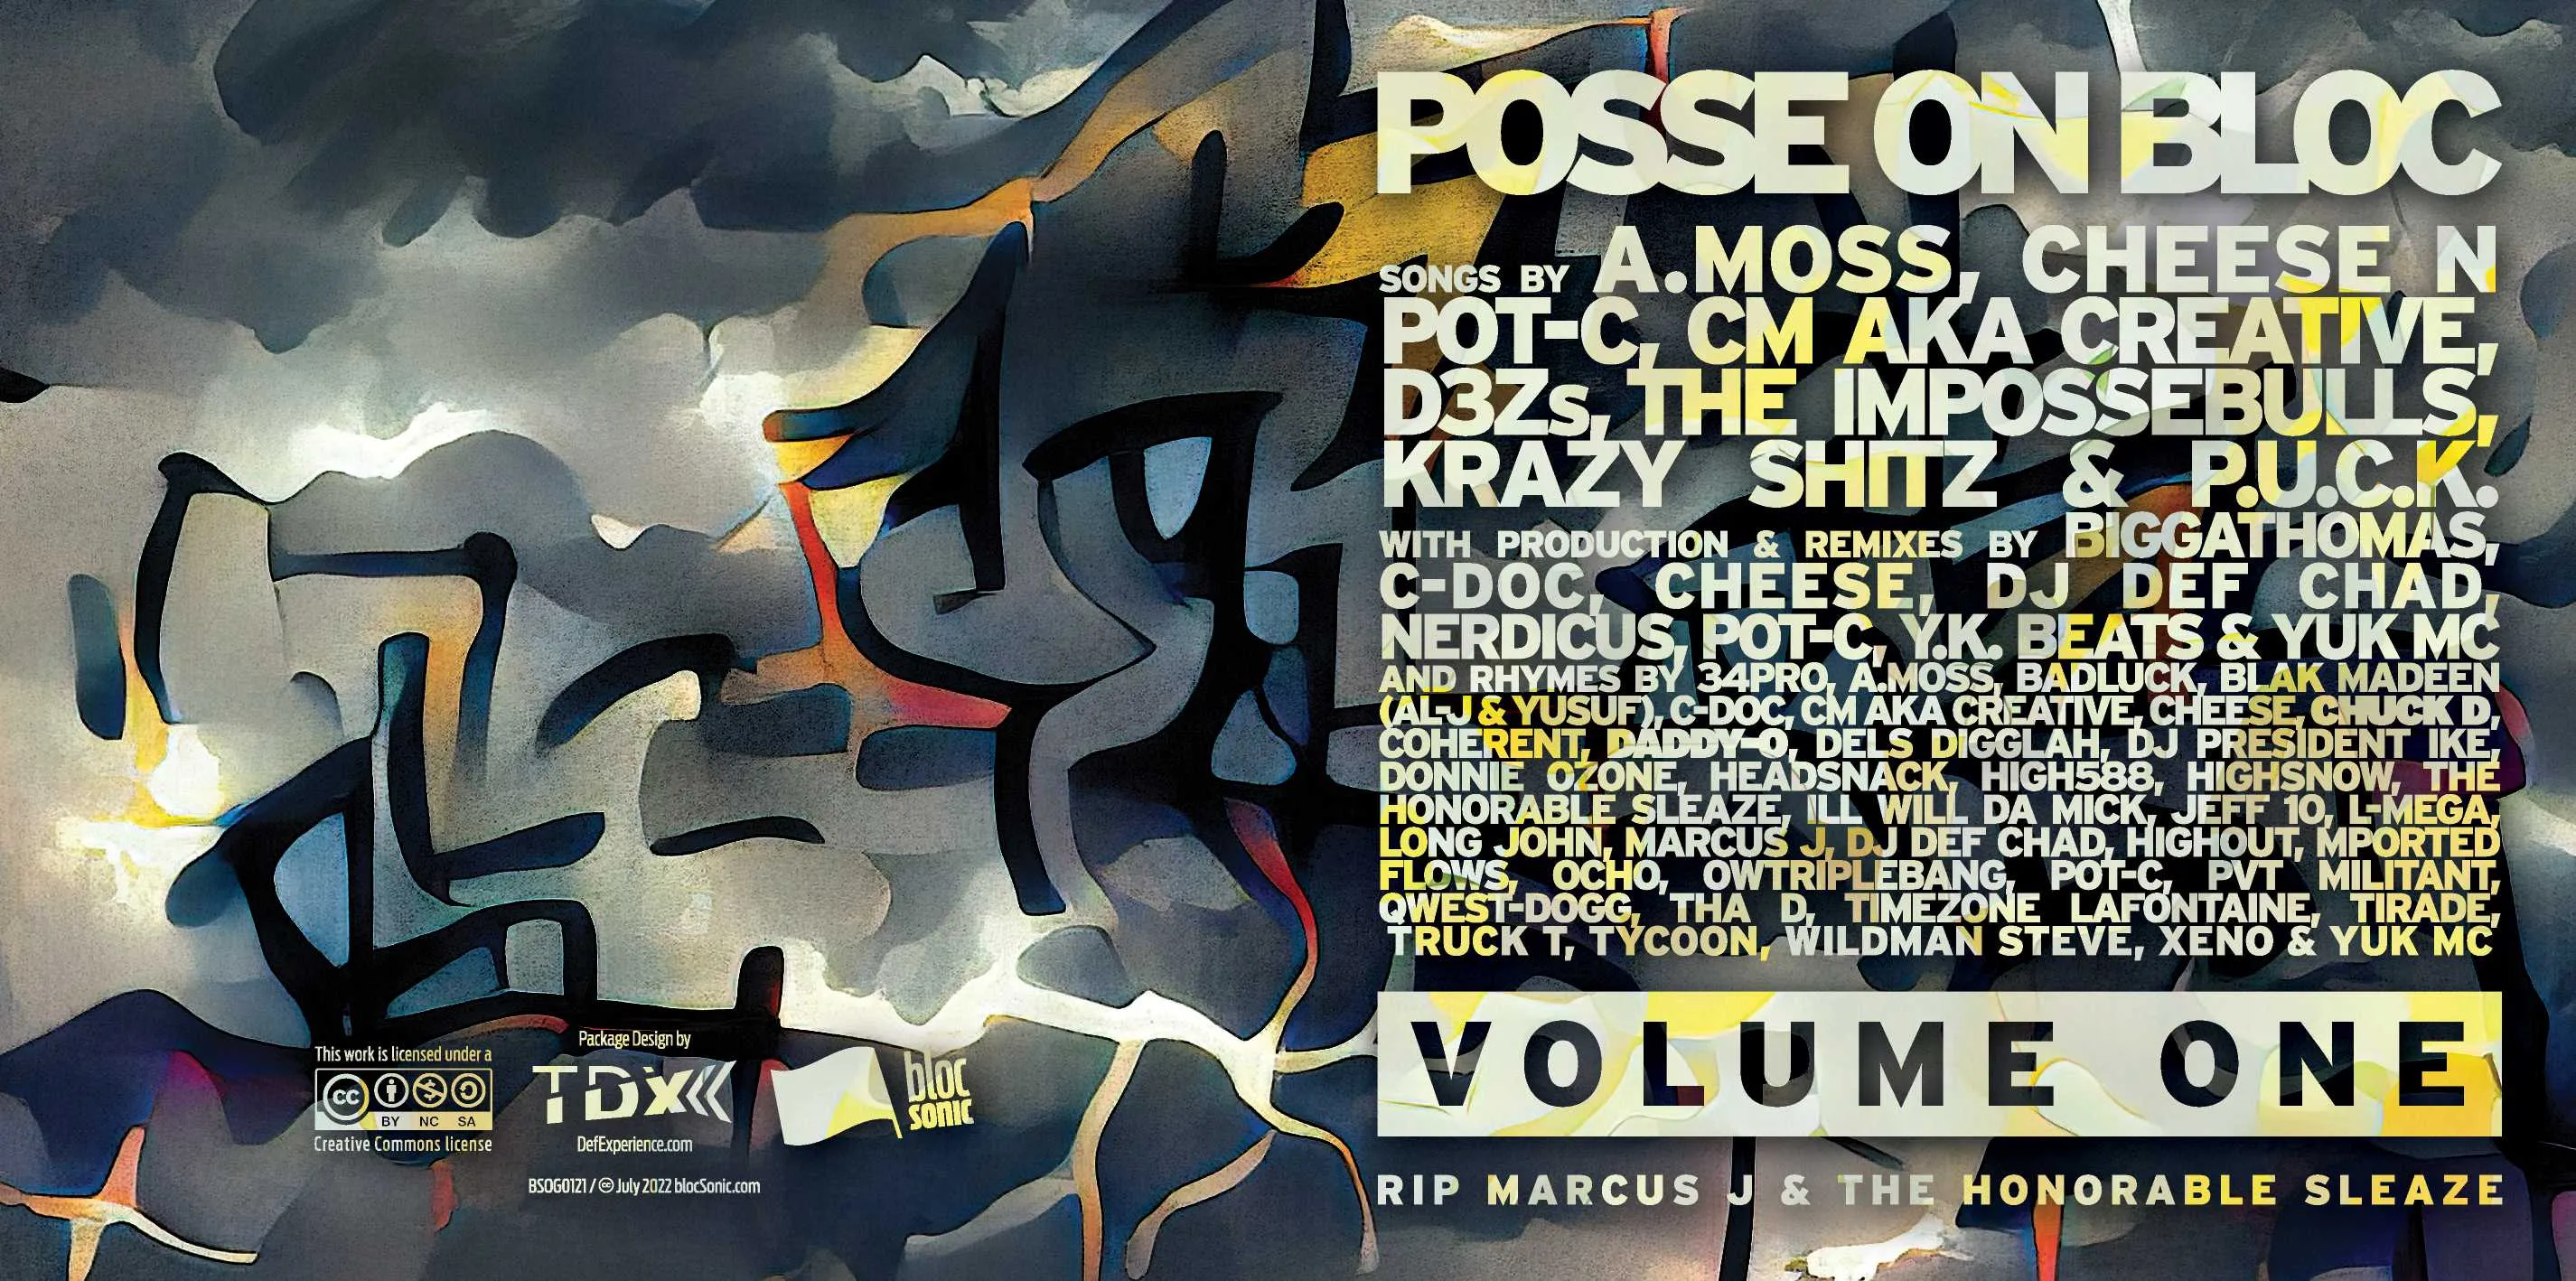 Album insert for “Posse On Bloc, Volume One (blocSonic Posse Cuts, So Far)” by Various Artists